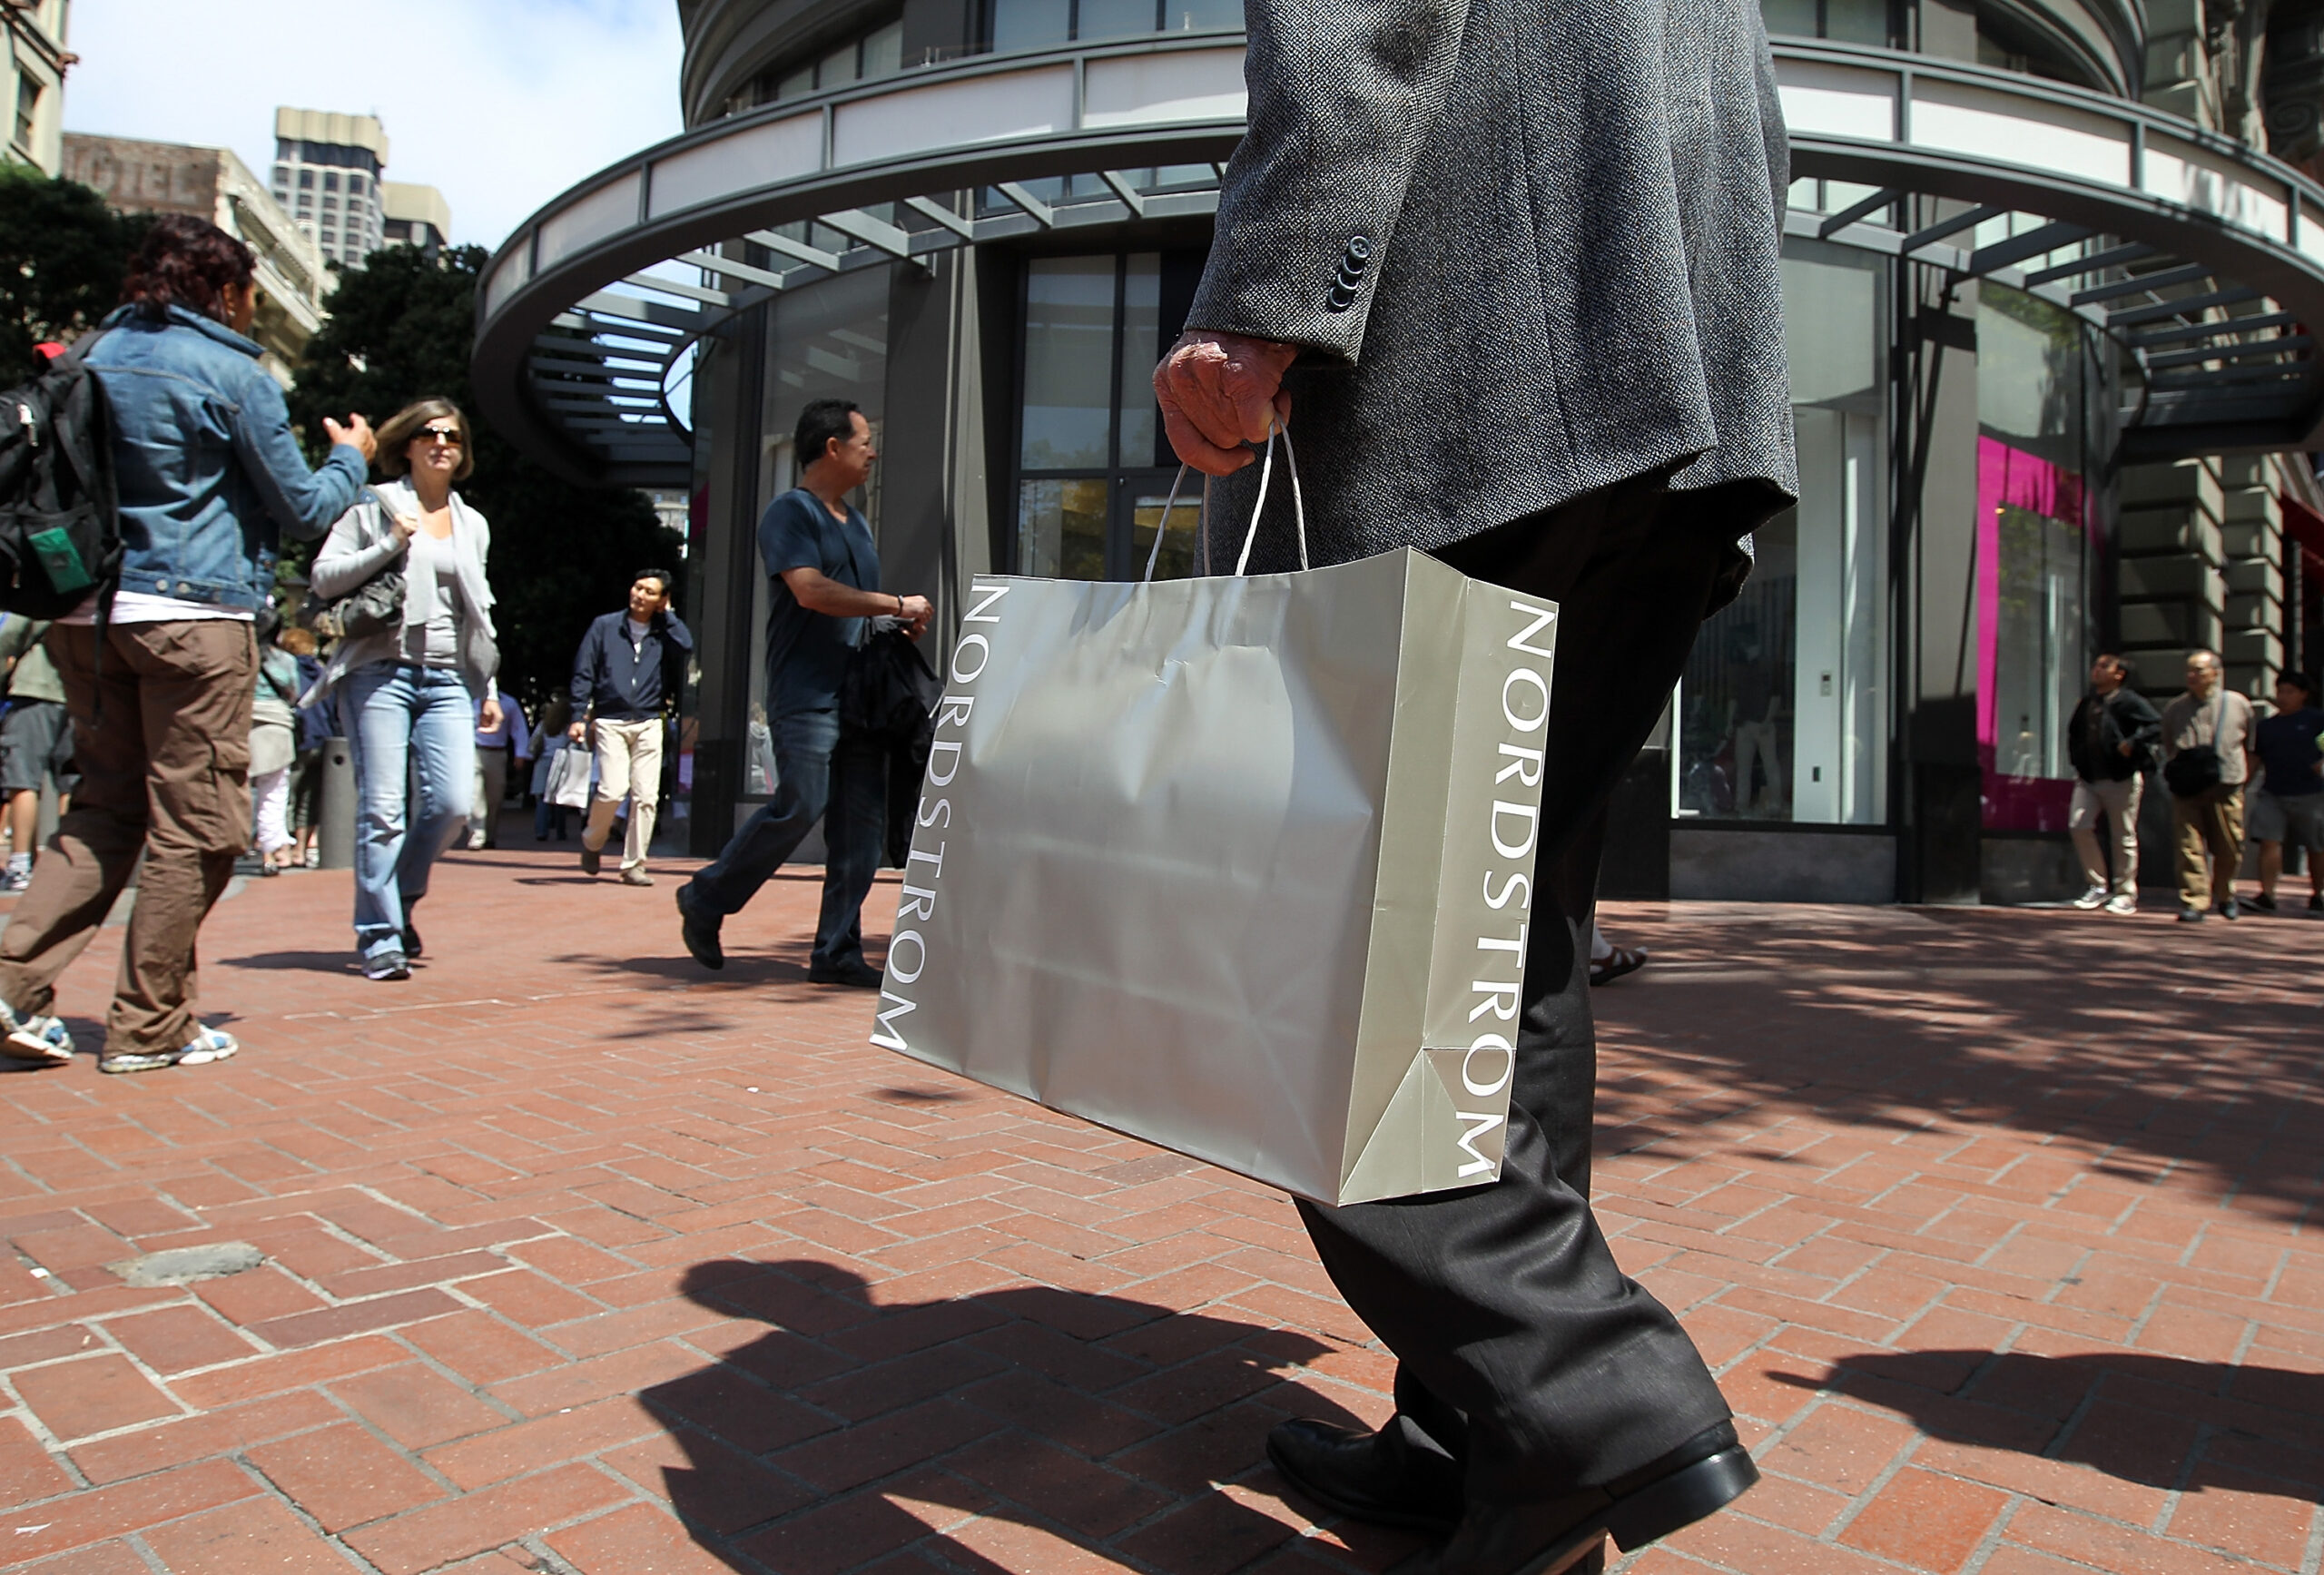 Nordstrom to Shutter Both Downtown San Francisco Stores, Citing Difficult Conditions